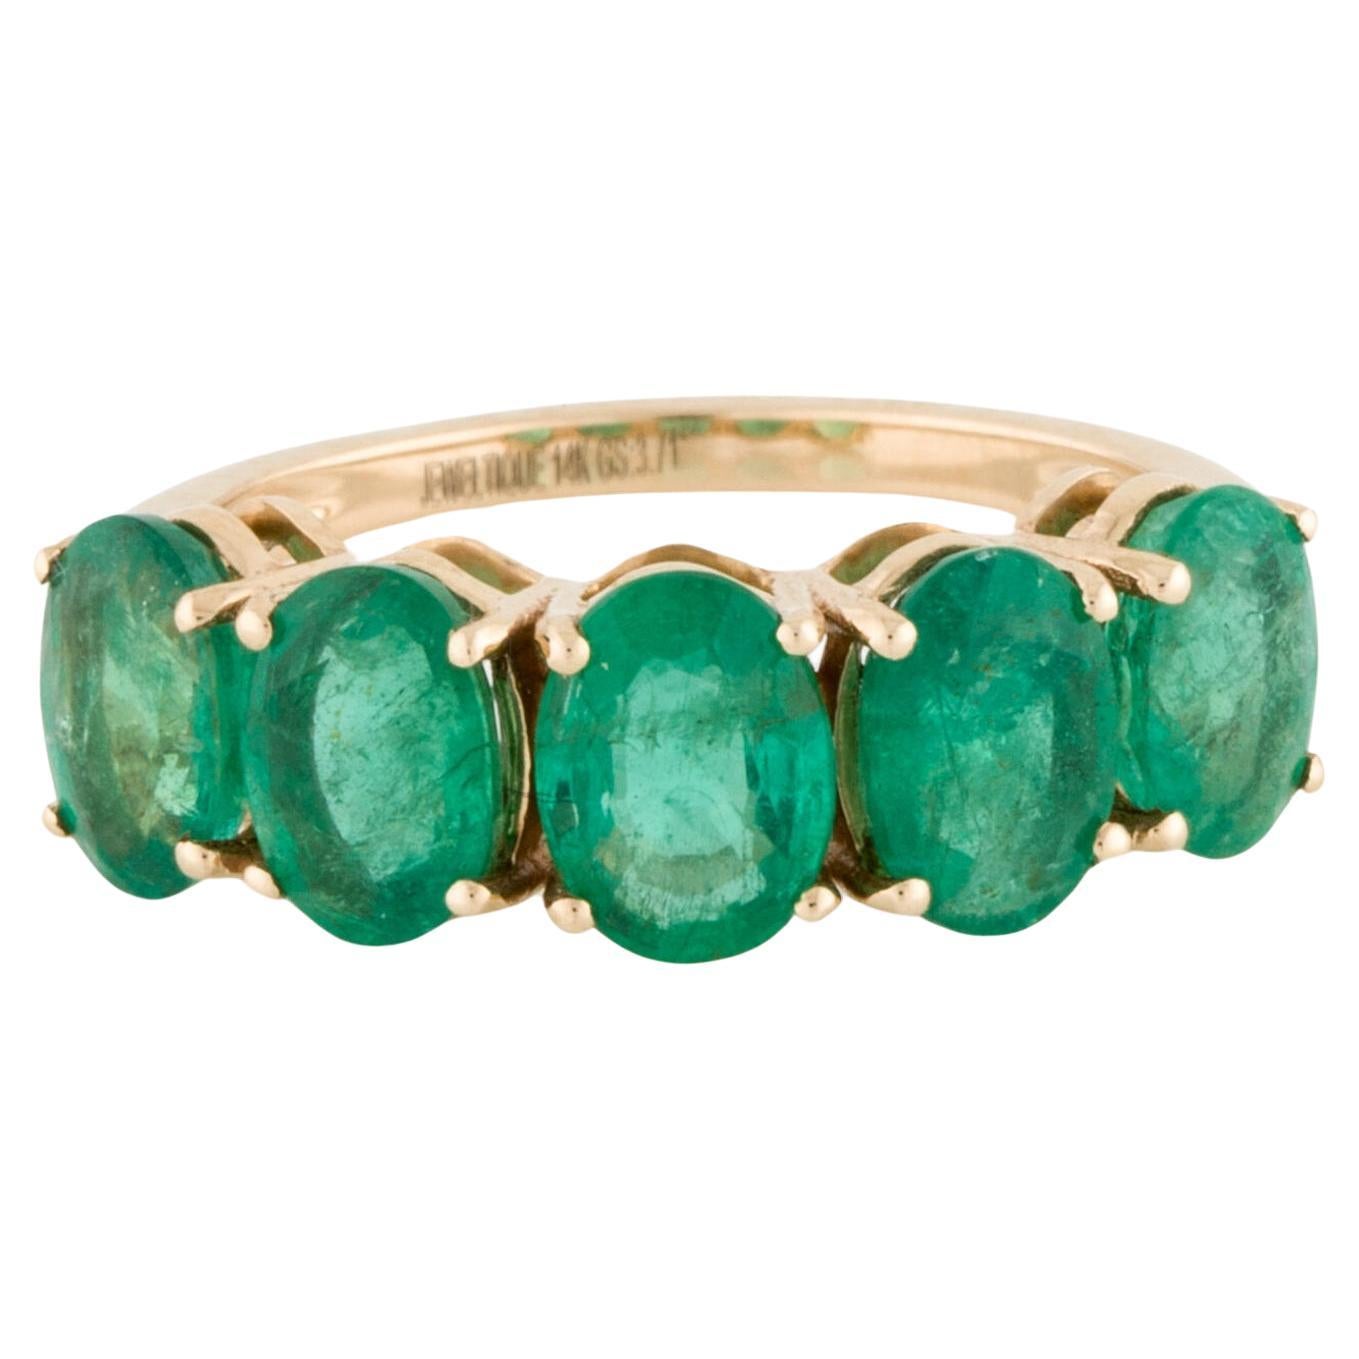 14K Emerald Band - Size 6.75 - Timeless Elegance, Luxury Jewelry Statement Ring For Sale